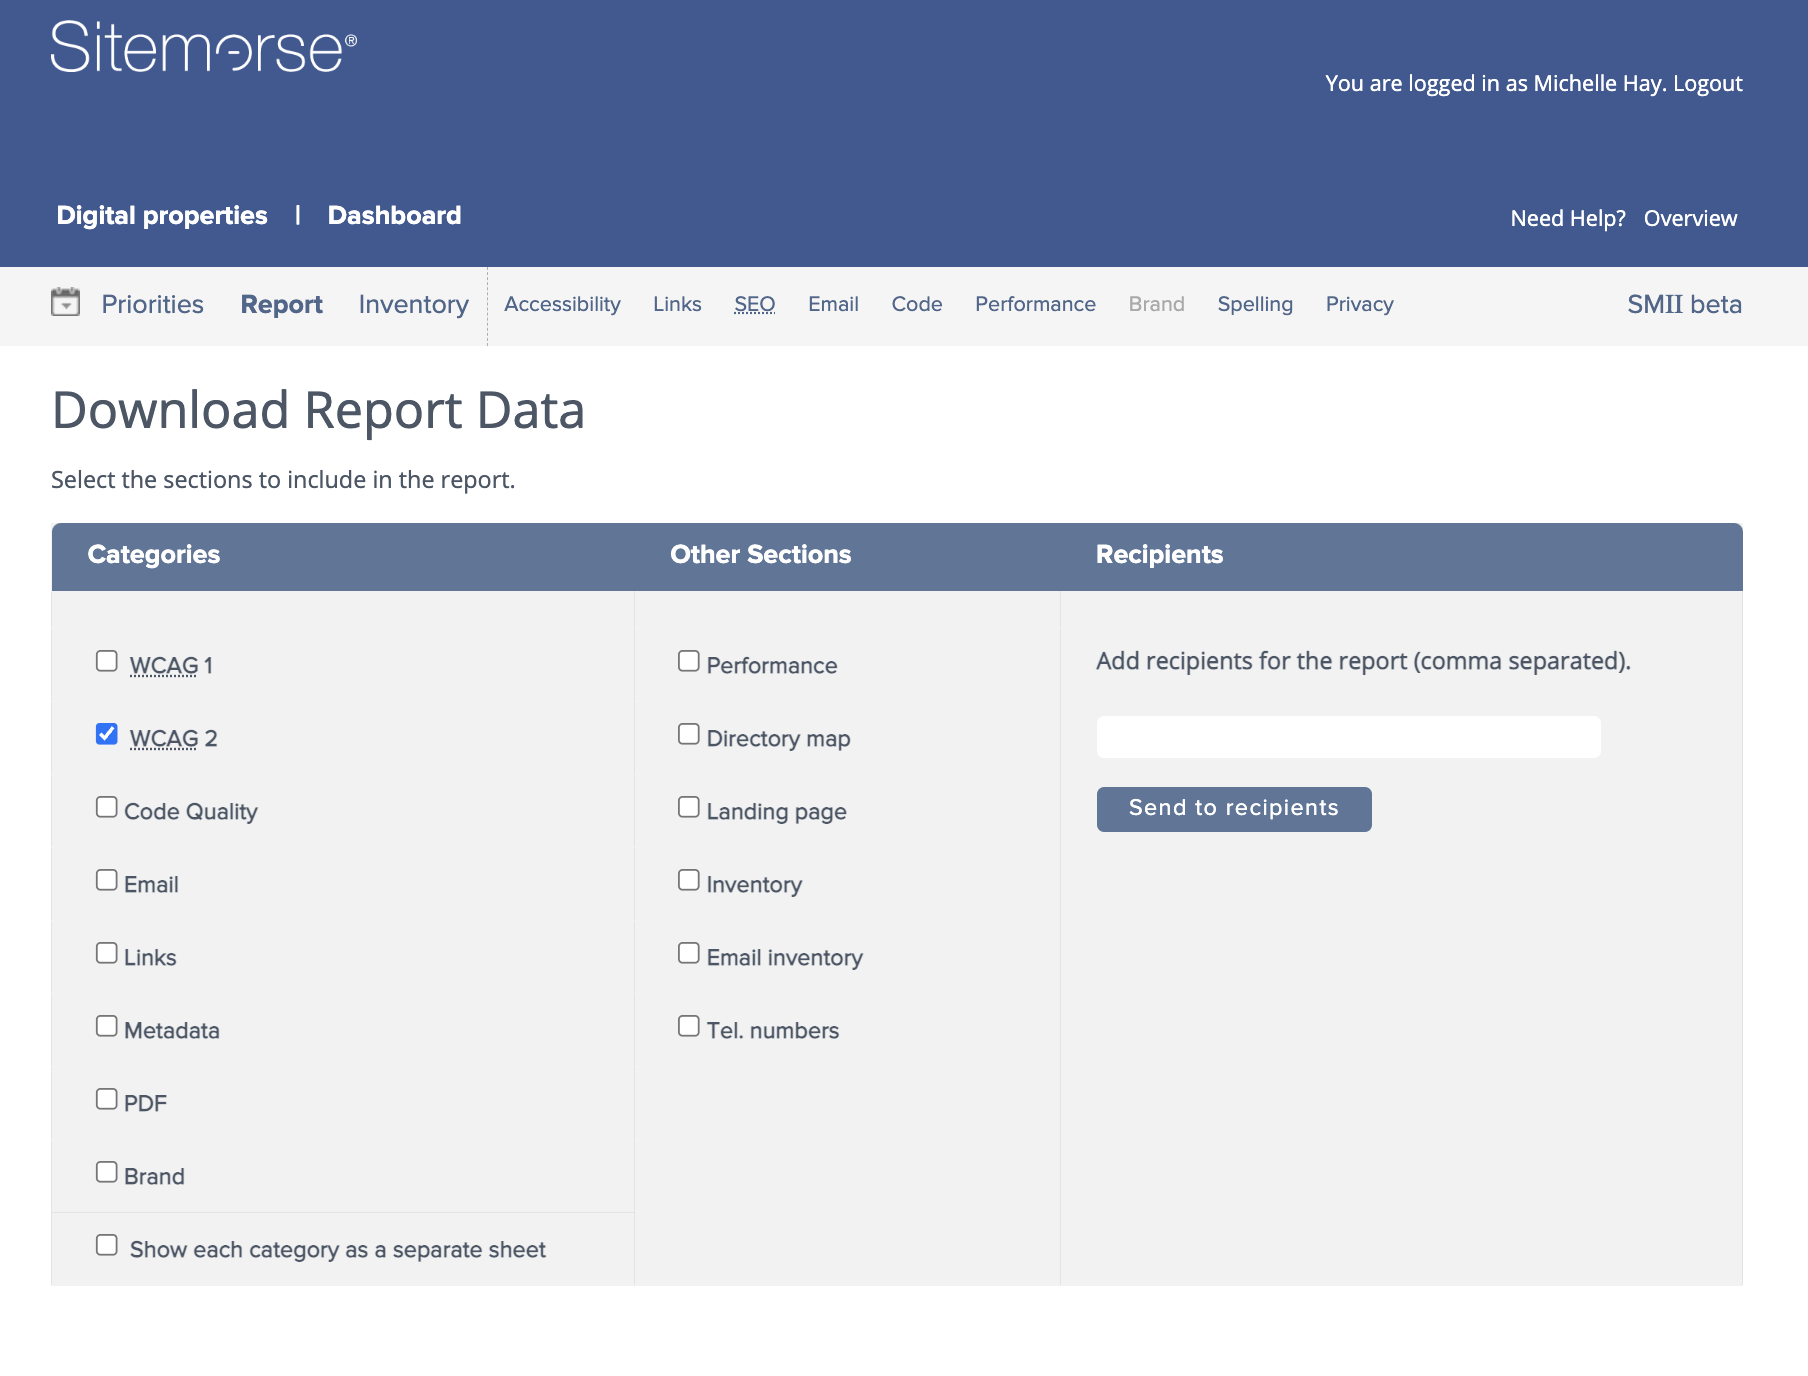 Screenshot of Sitemorse system showing a report being downloaded.